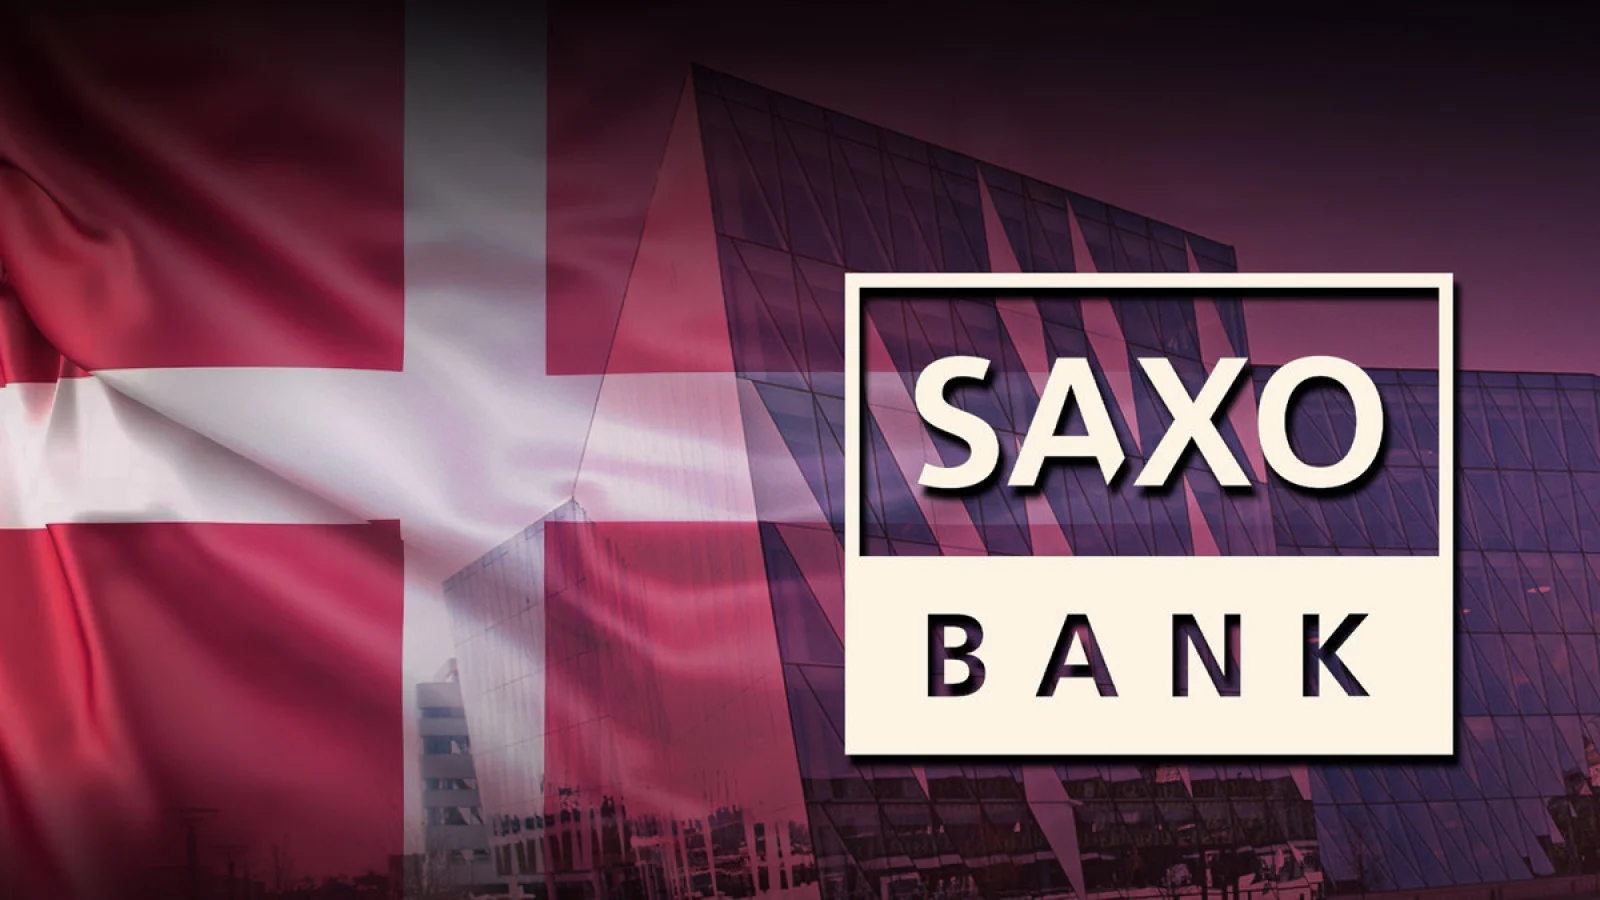 Saxo Bank to Comply With FSA Orders